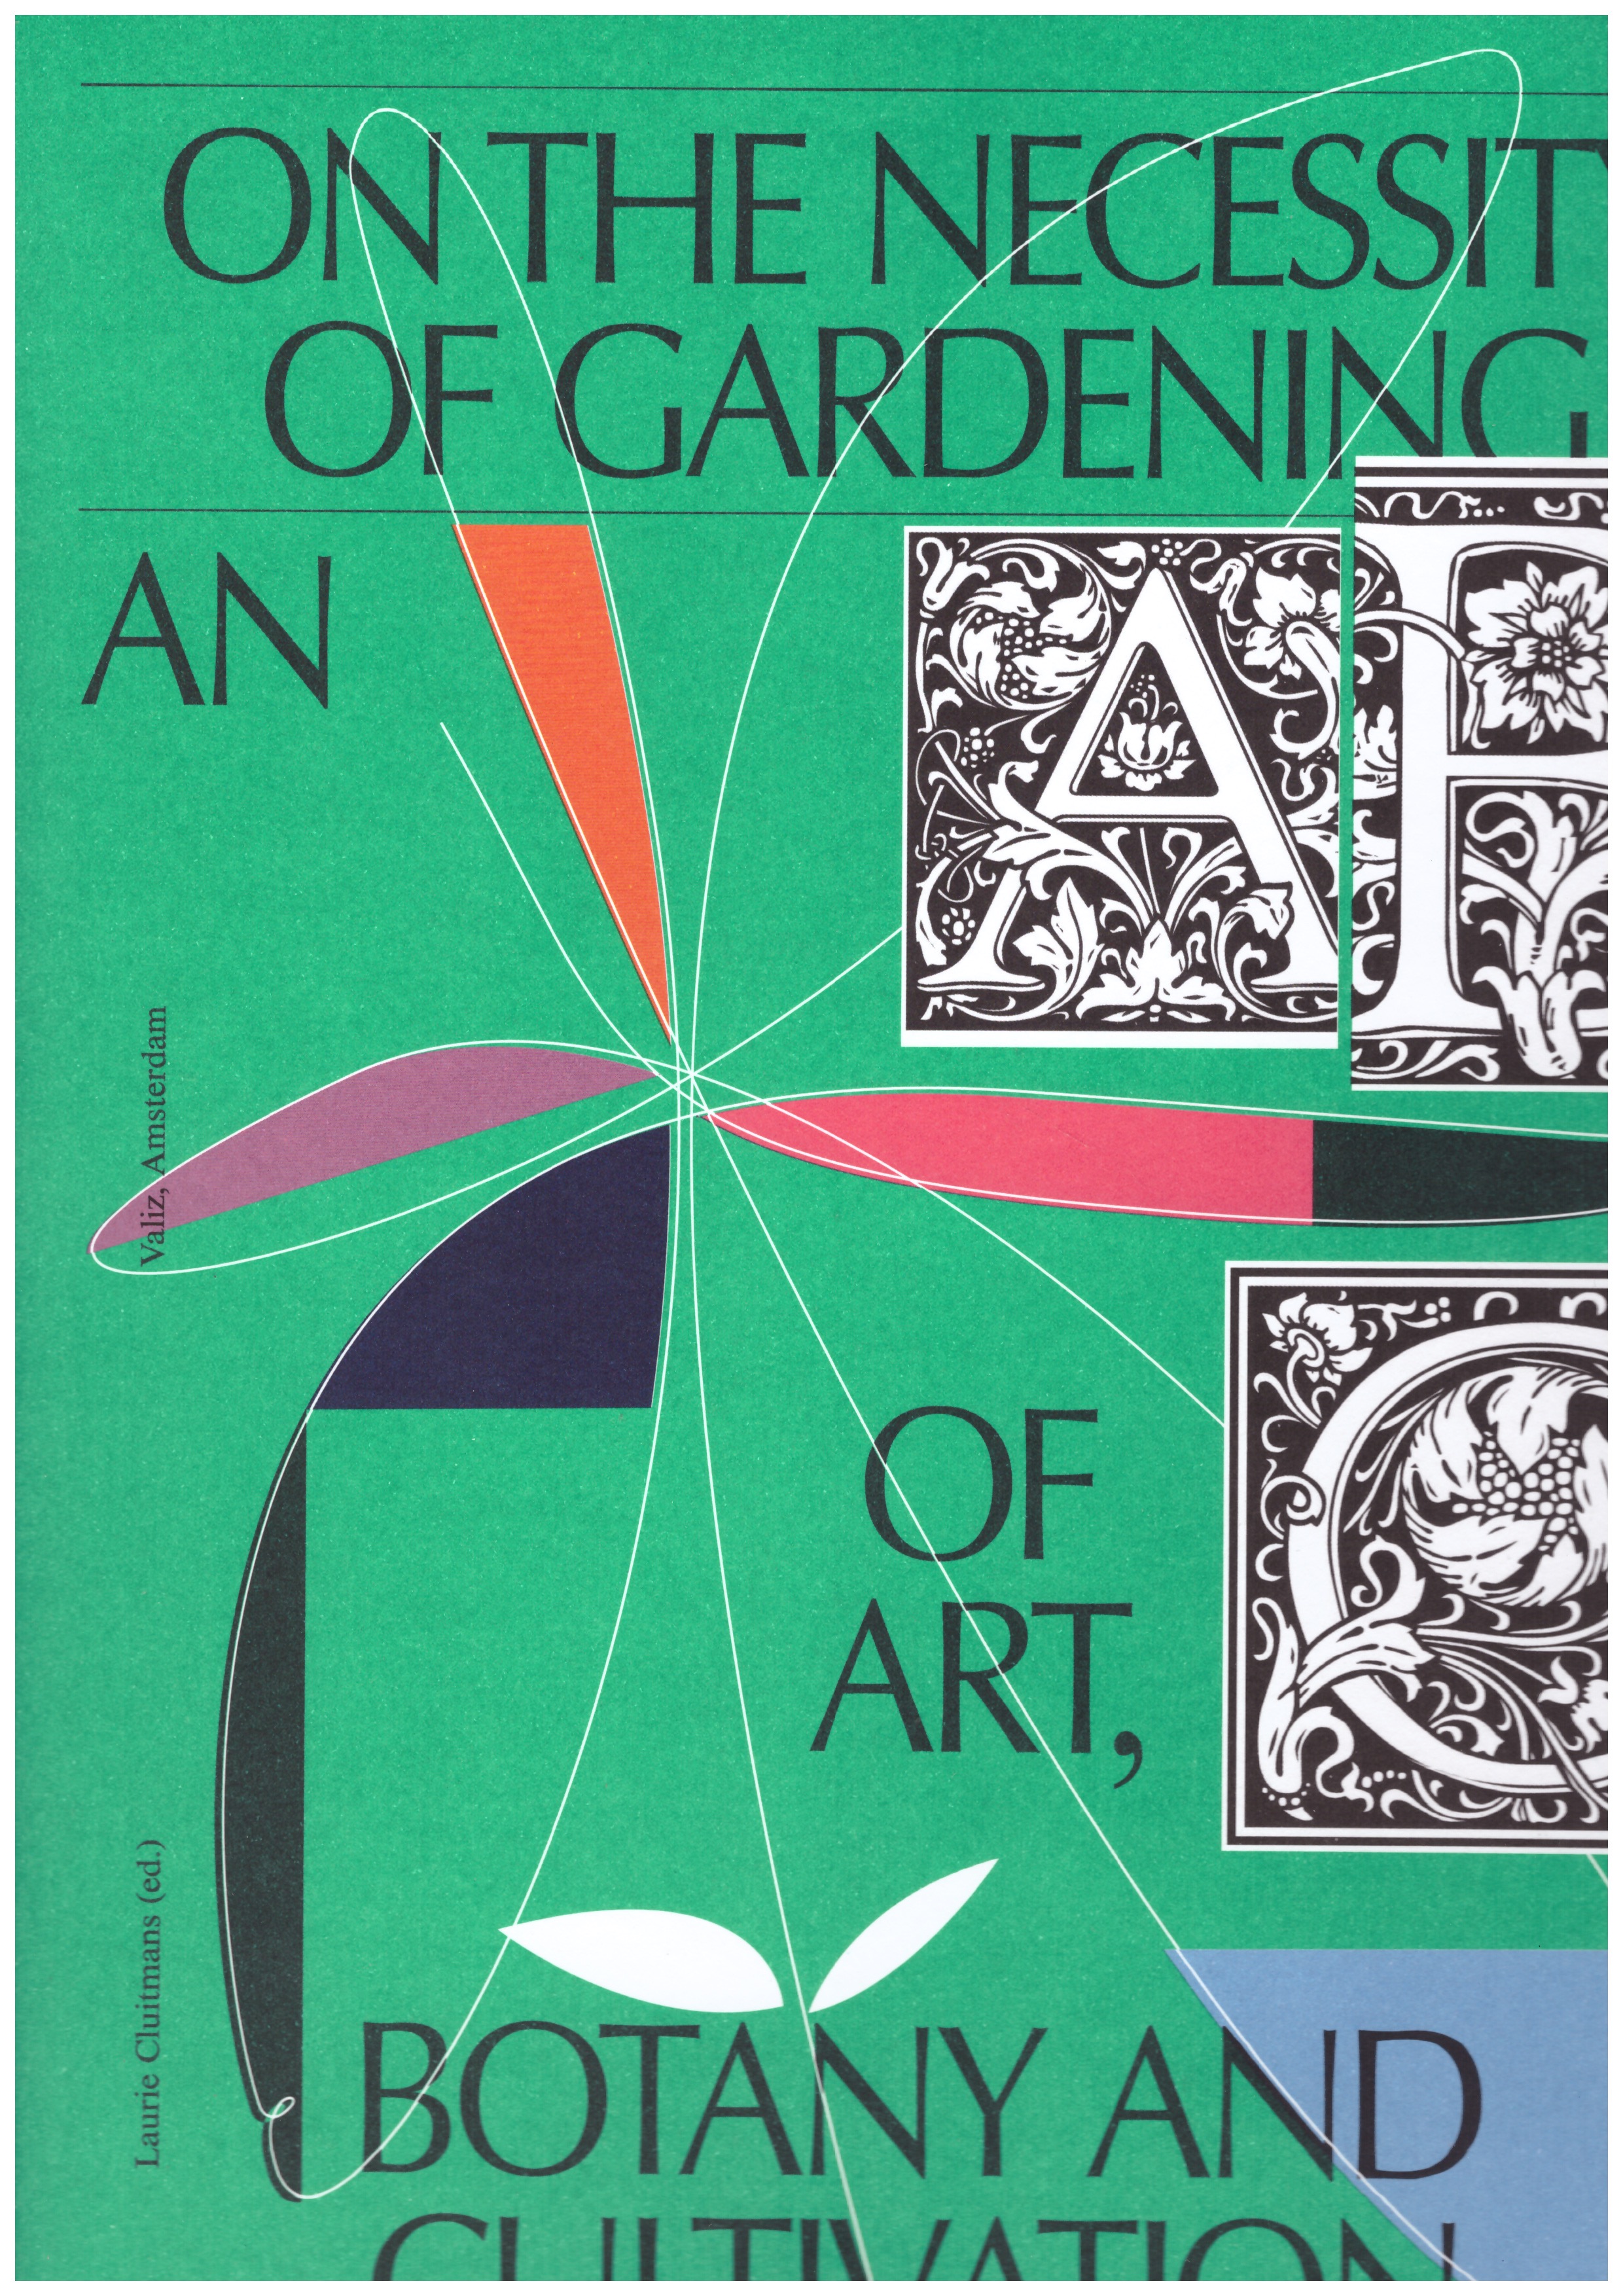 CLUITMANS, Laurie (ed.) - On the necessity of gardening and of art, botany and cultivation